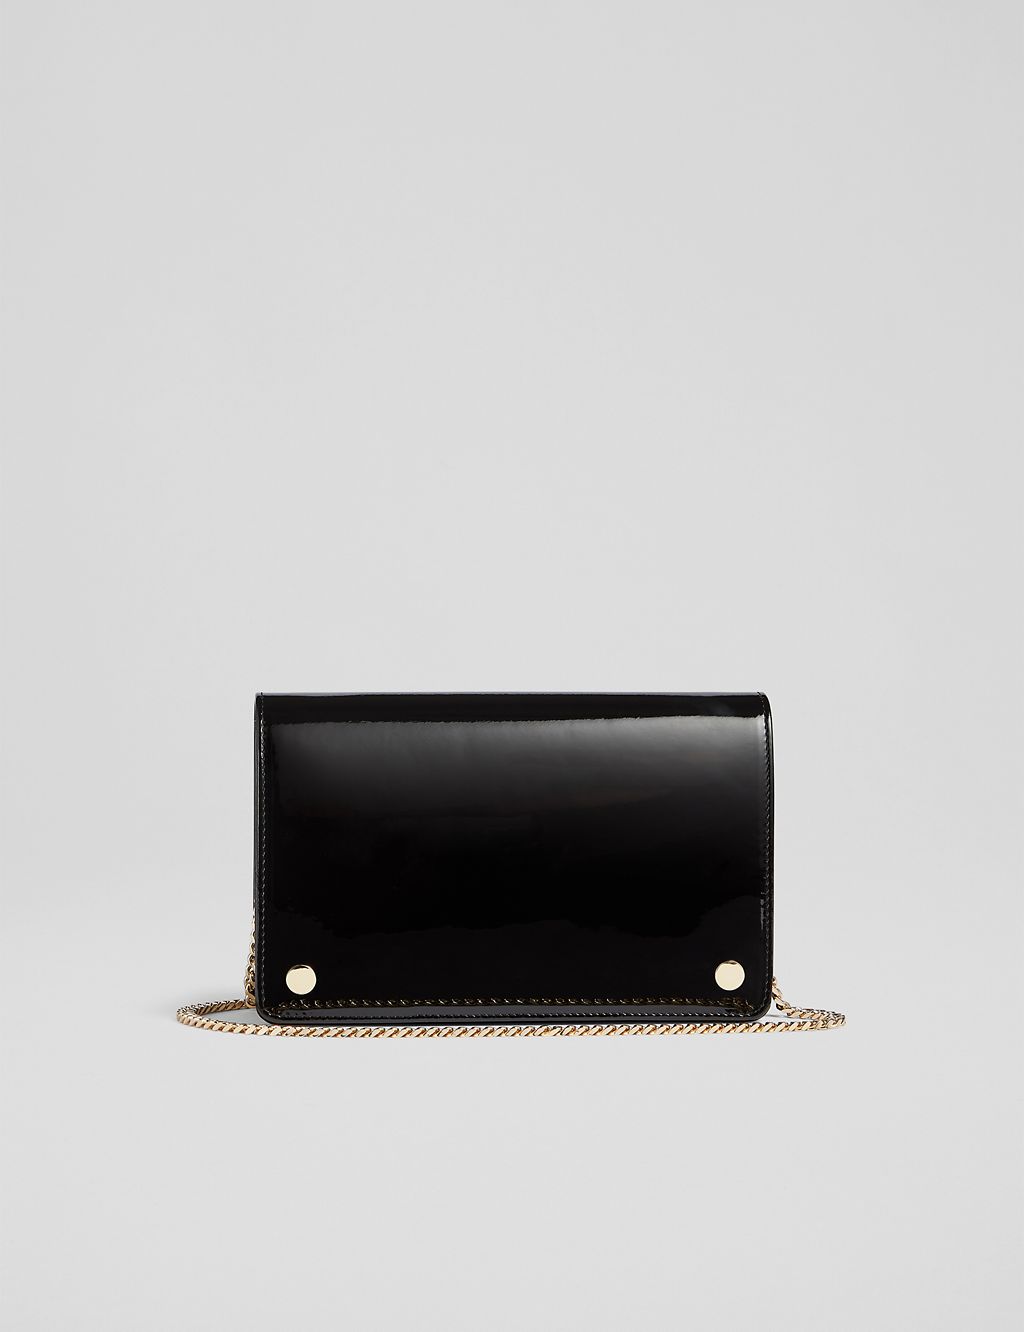 Leather Patent Finish Chain Strap Clutch Bag 3 of 3